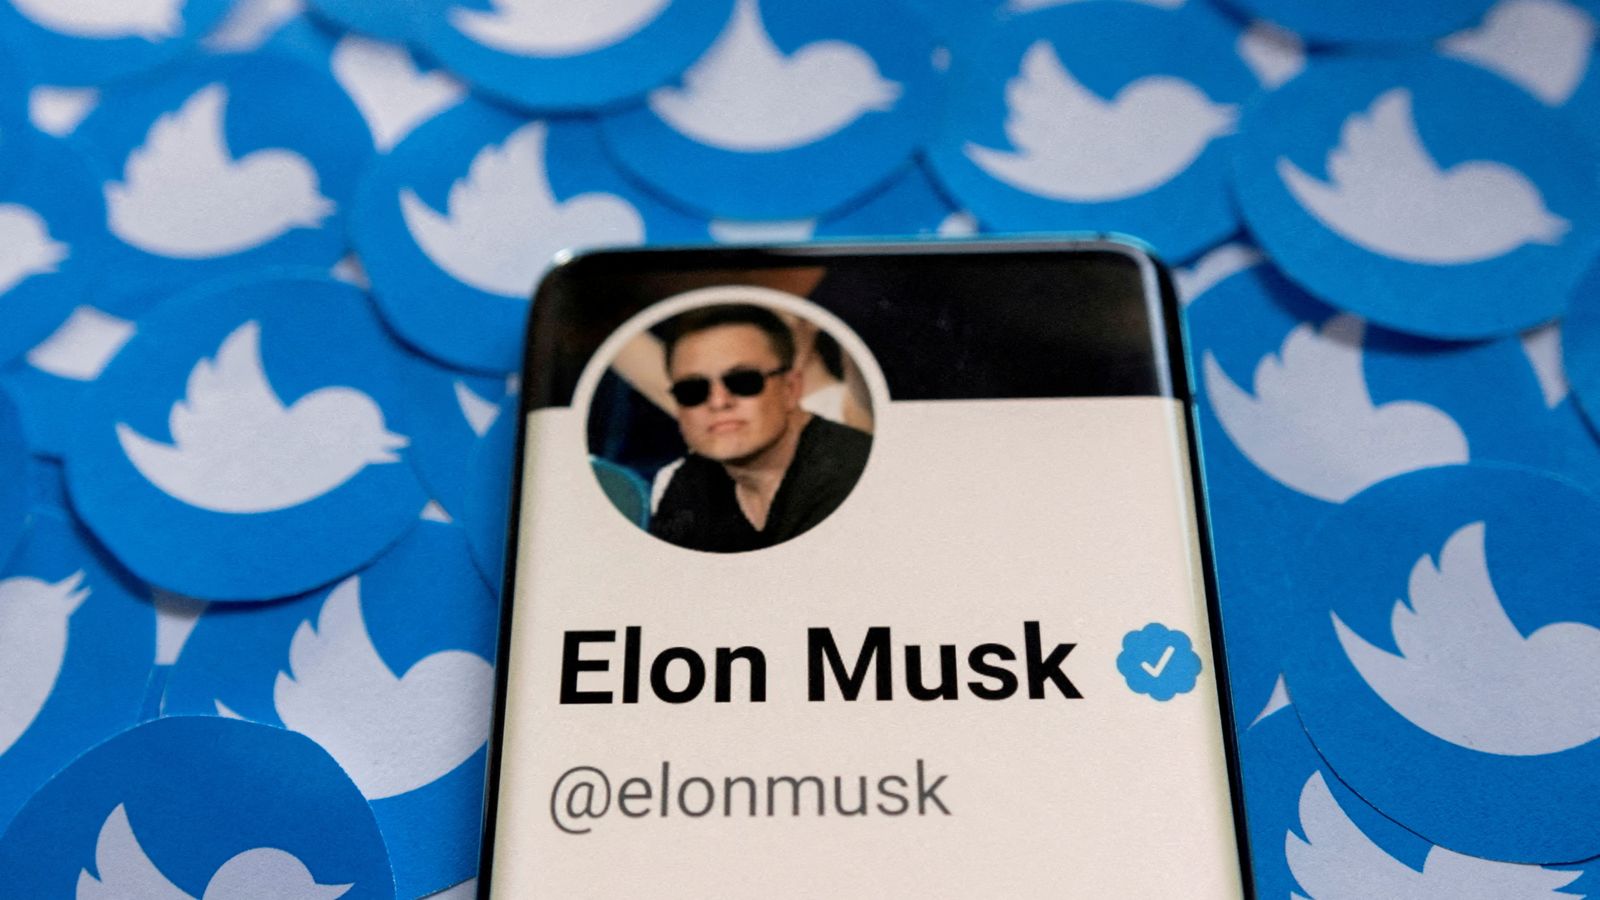 Elon Musk says Twitter has to show spam accounts are less than 5% for takeover to go ahead